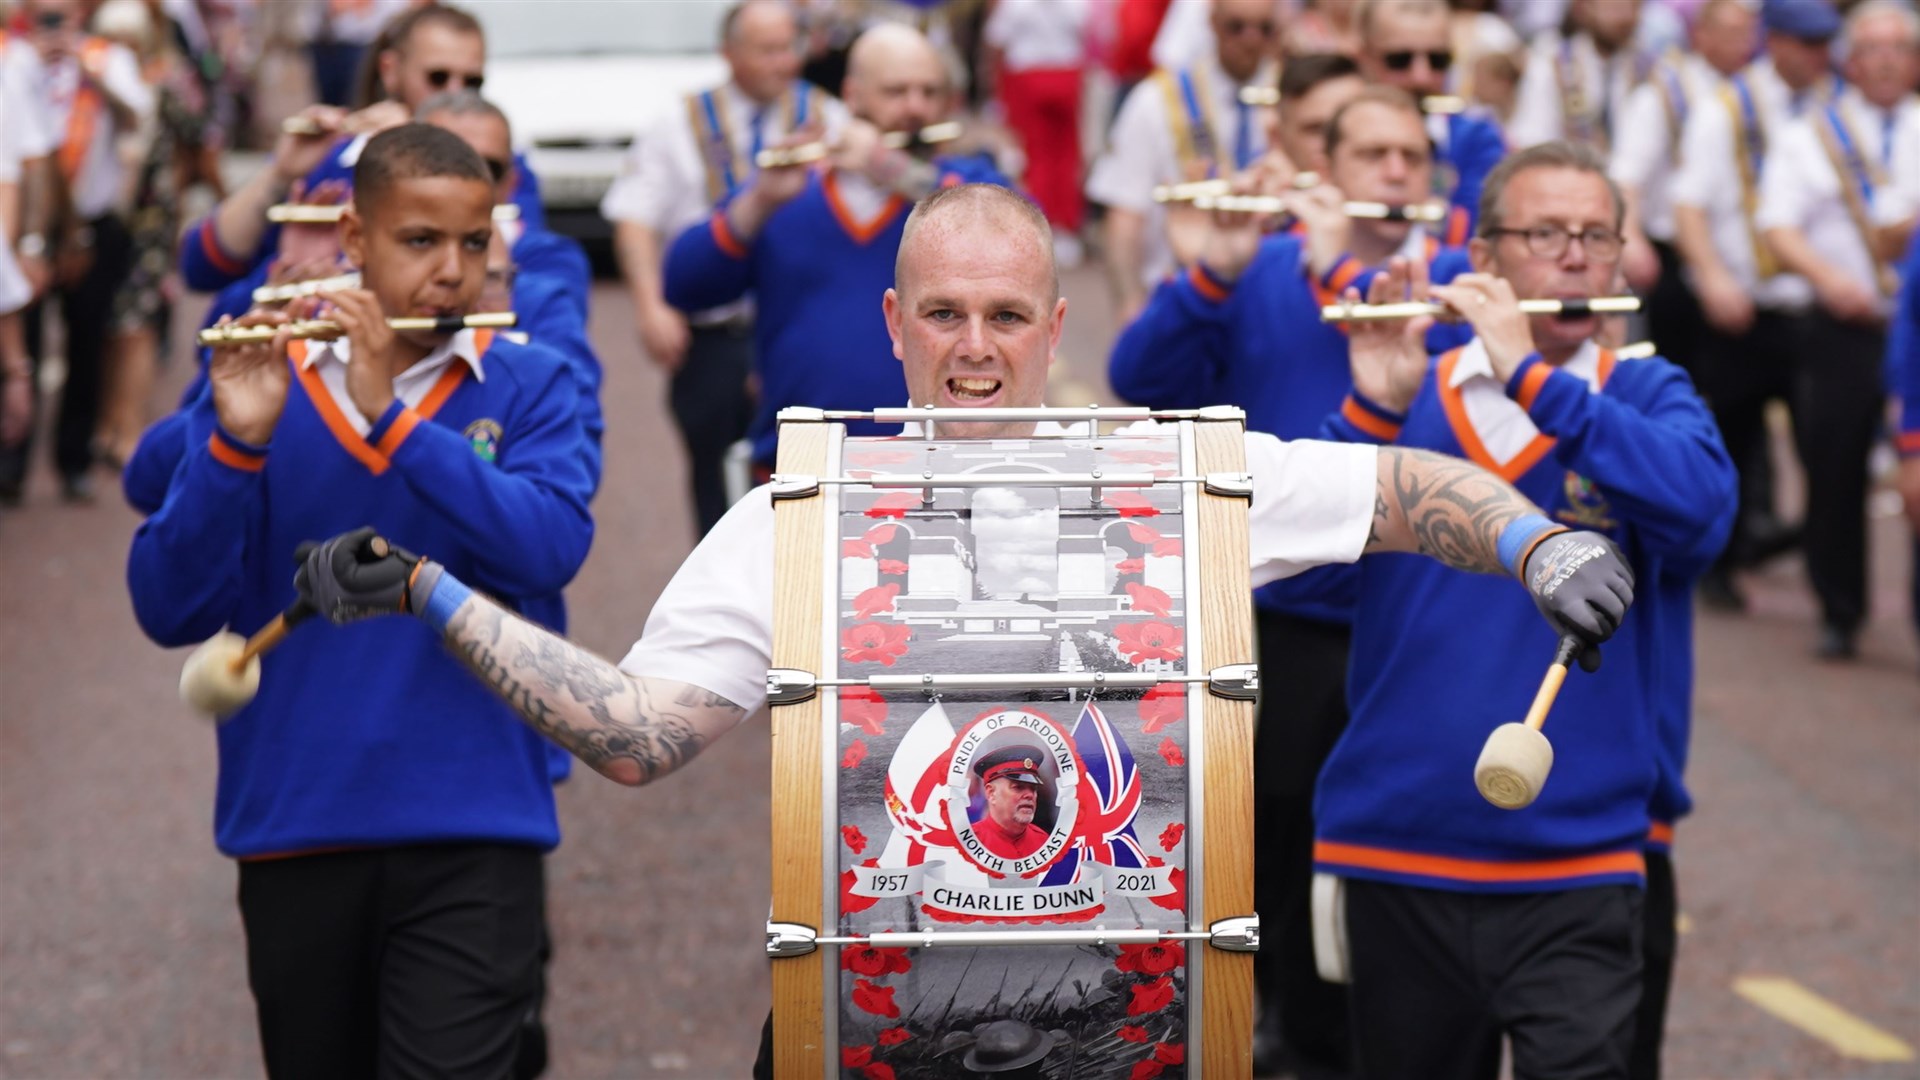 Members of a Protestant loyalist order take part in a Twelfth of July parade in Belfast (Niall Carson/PA)